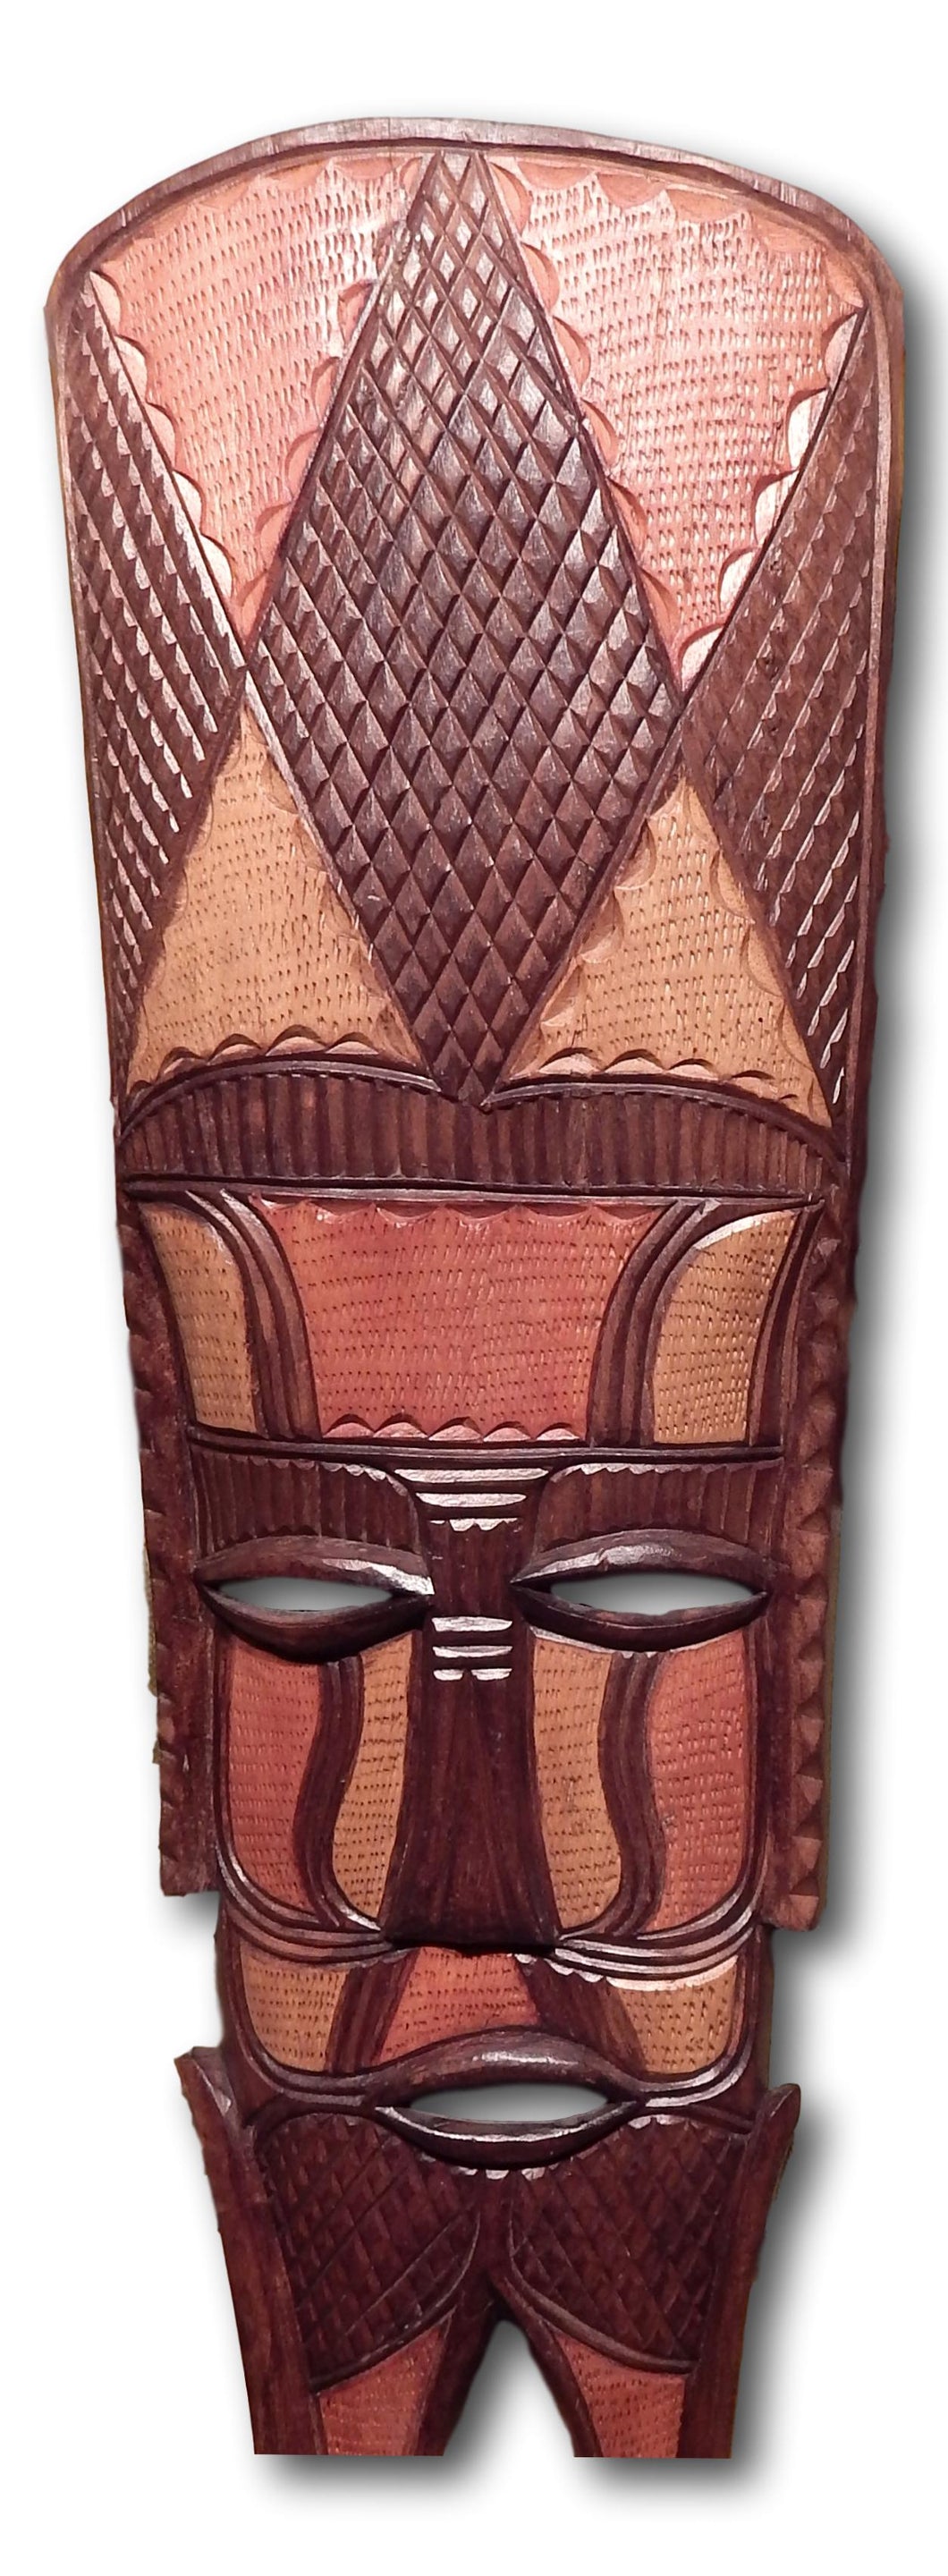 Mask art decoration handcrafted from Teak wood